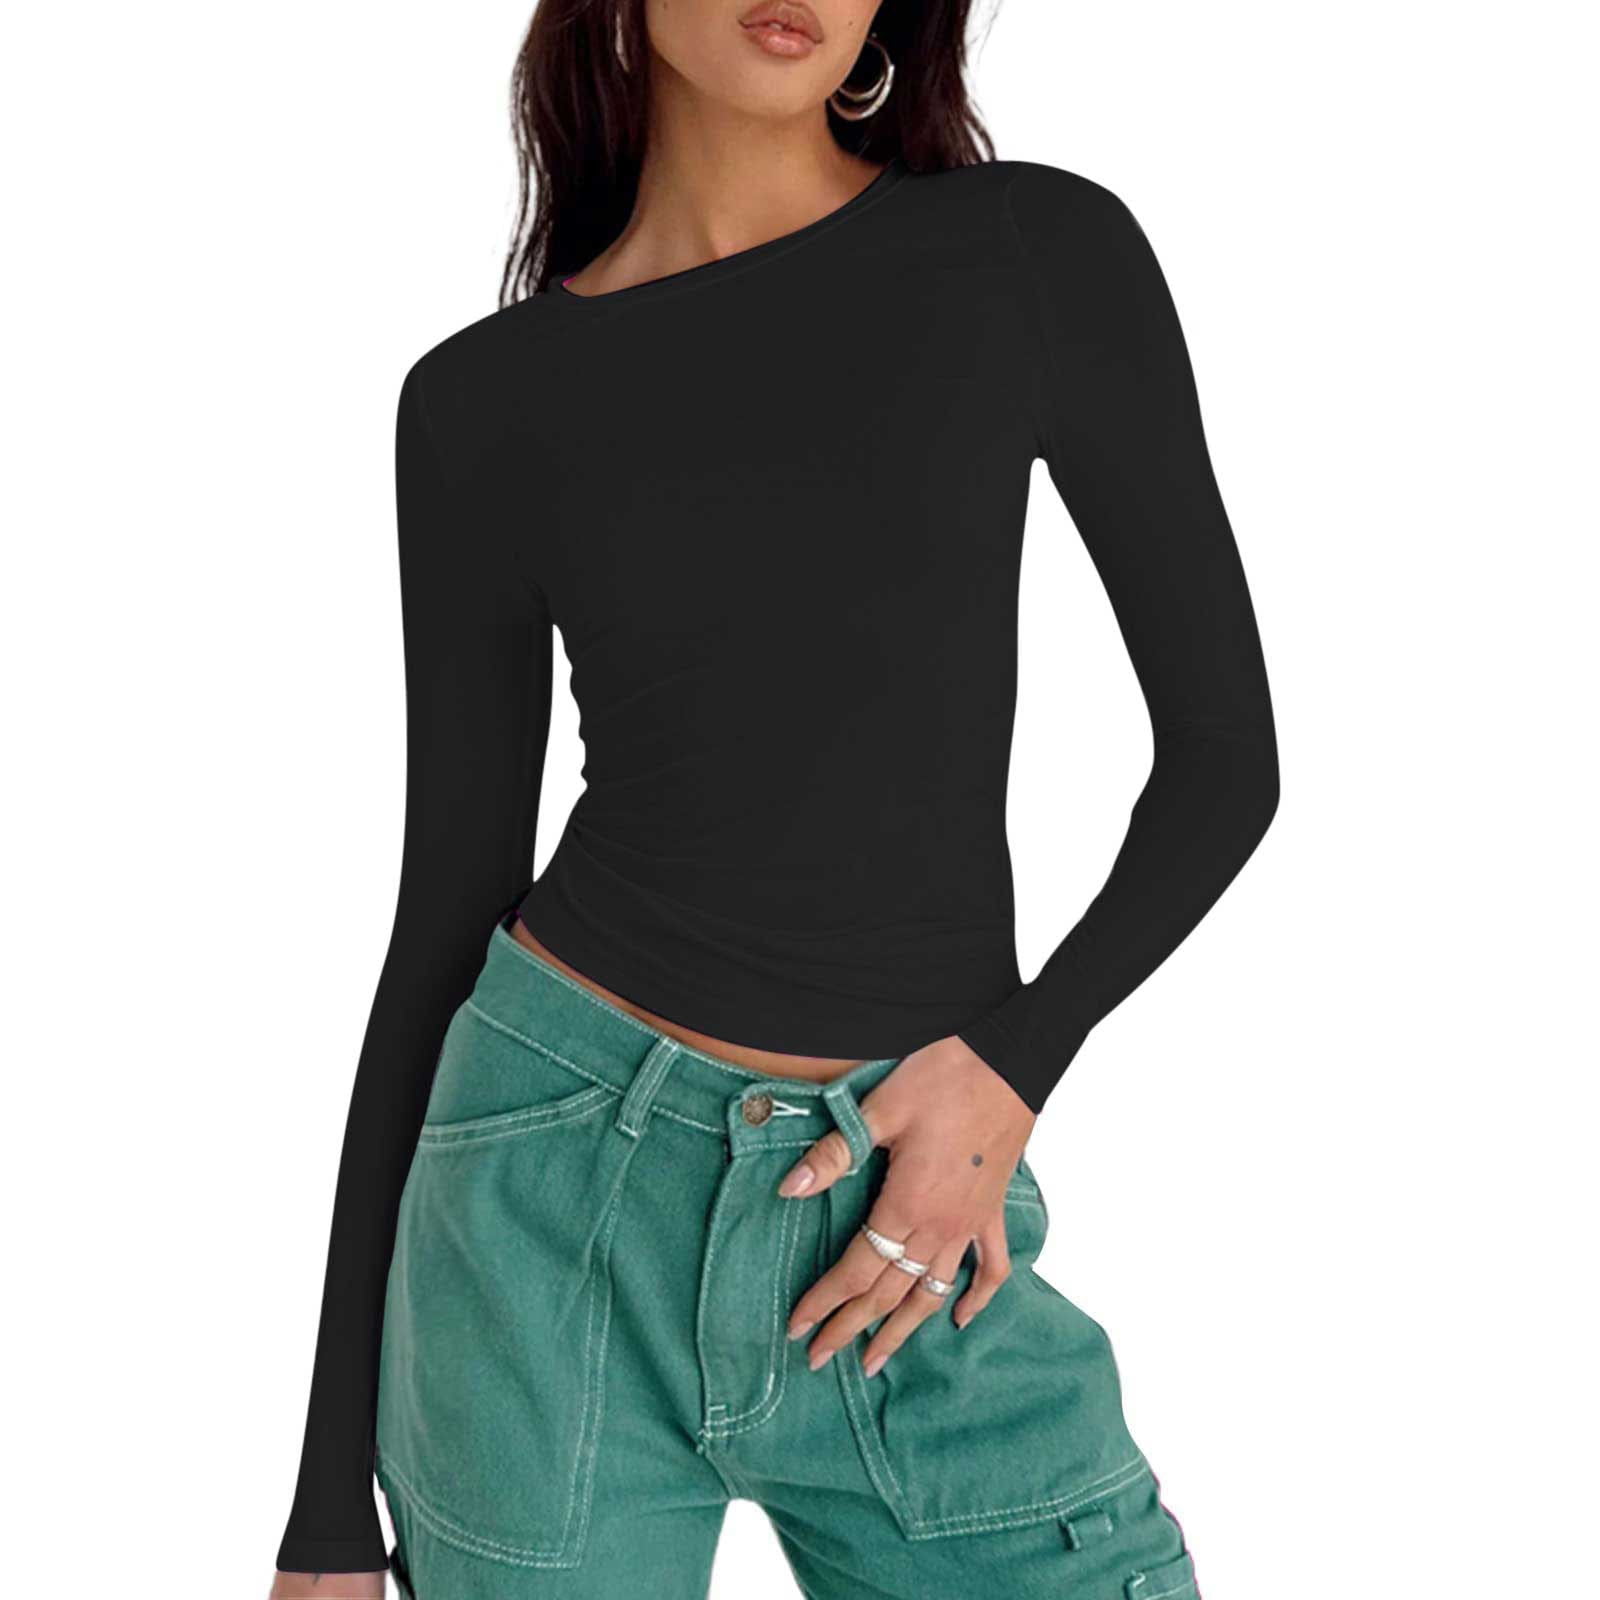 Black Long Sleeved Undershirt Women Womens Fashion Top Casual Loose Striped  Round Neck Long Sleeve T Shirt